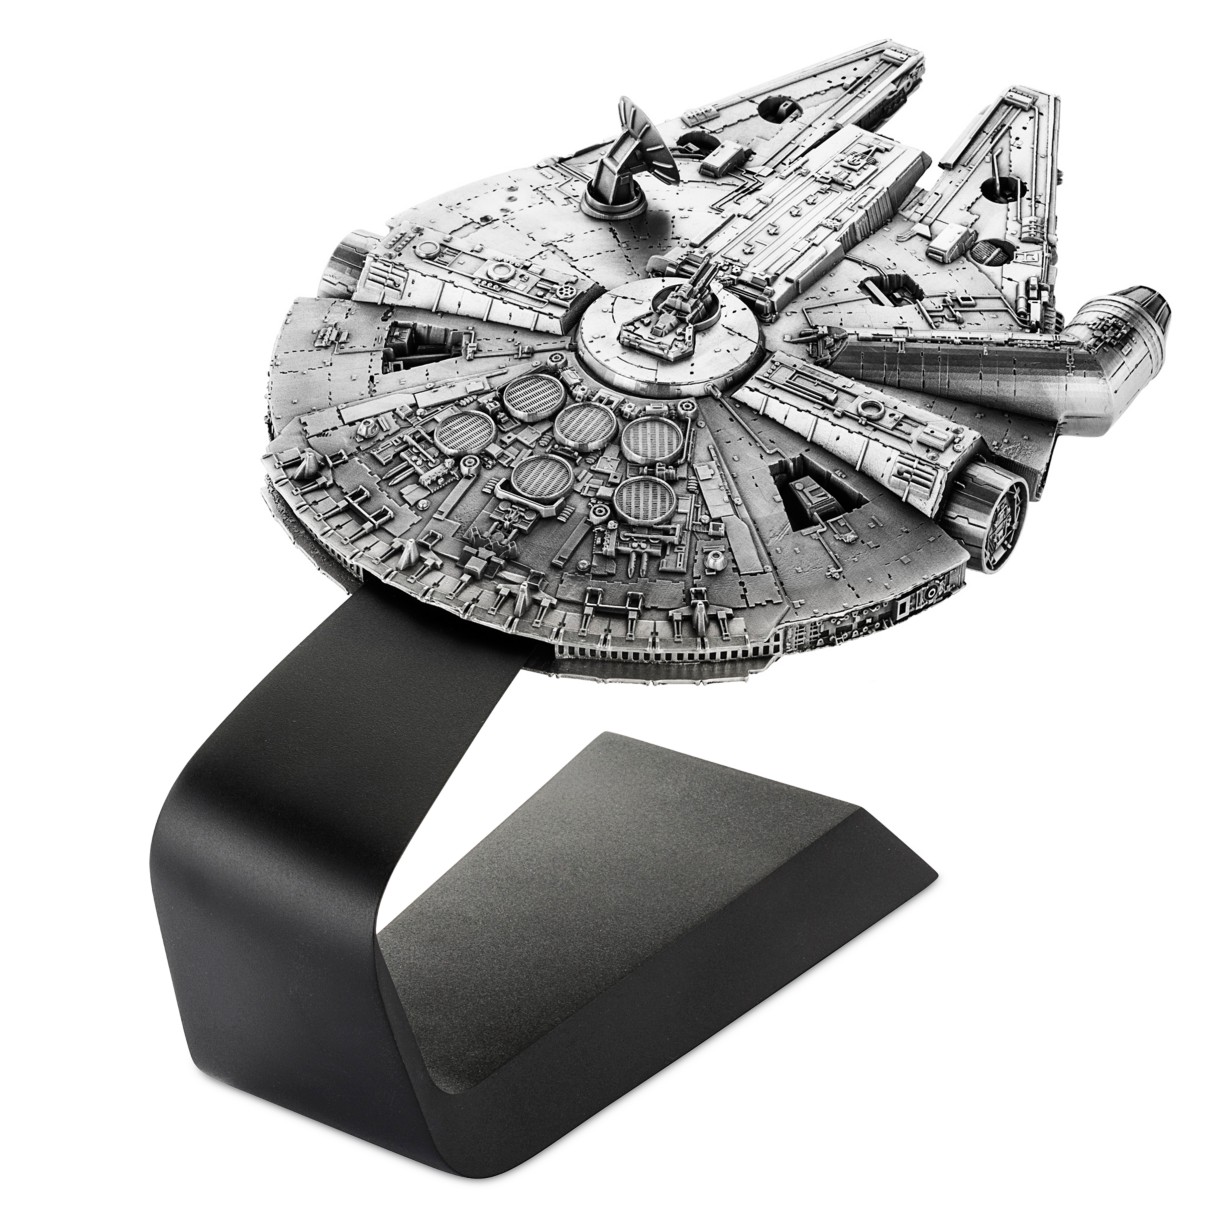 Millennium Falcon Pewter Replica by Royal Selangor – Star Wars – Limited Edition